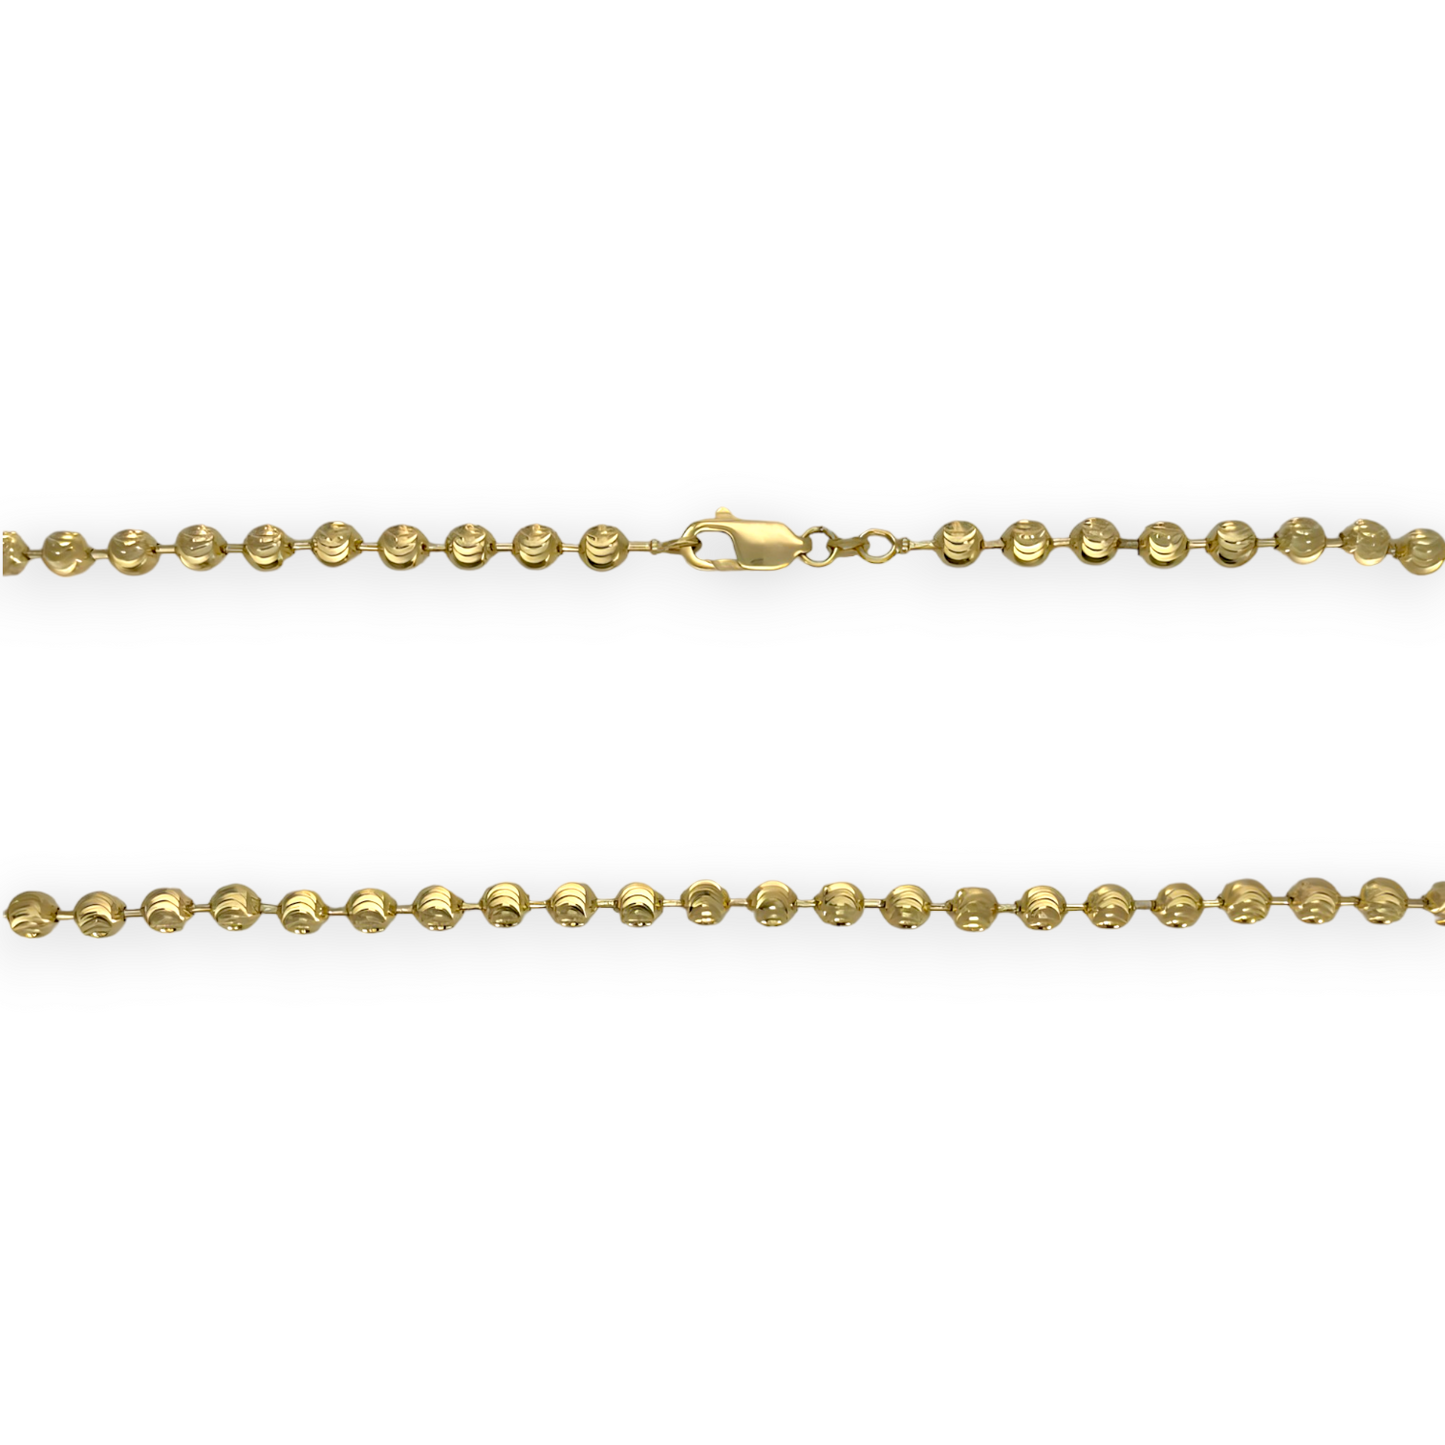 Bead Ball Moon Cut Link Chain Necklace - 14K Yellow Gold - Solid